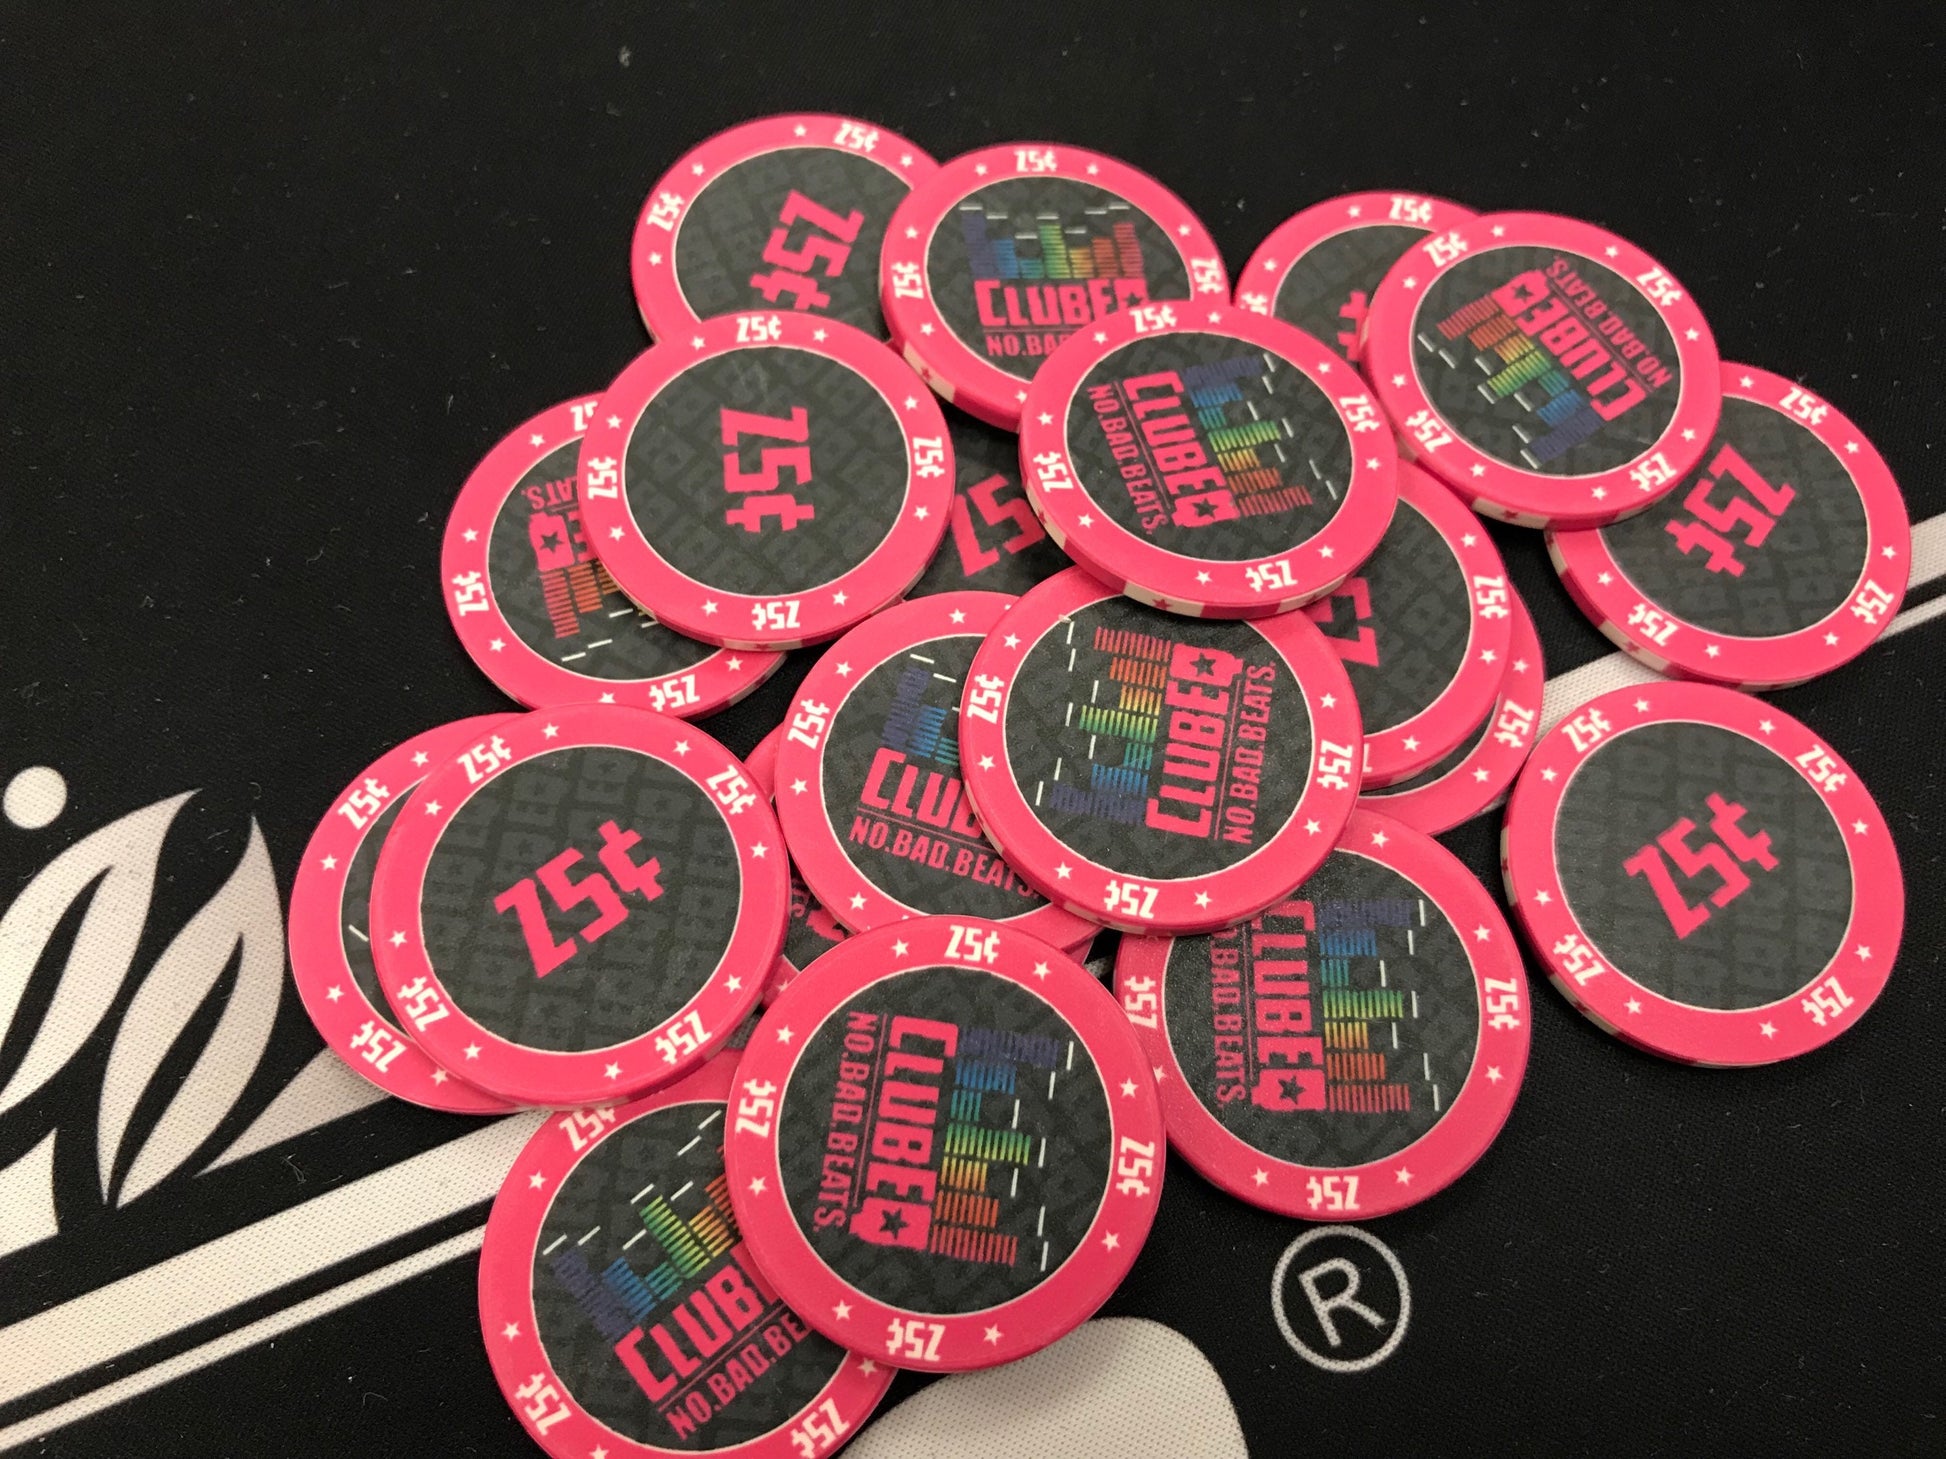 Pink 25¢ (twenty-five cent) ClubEQ poker chips in a pot. These stylish poker chips will liven up your poker game and keep your guests buying back in.